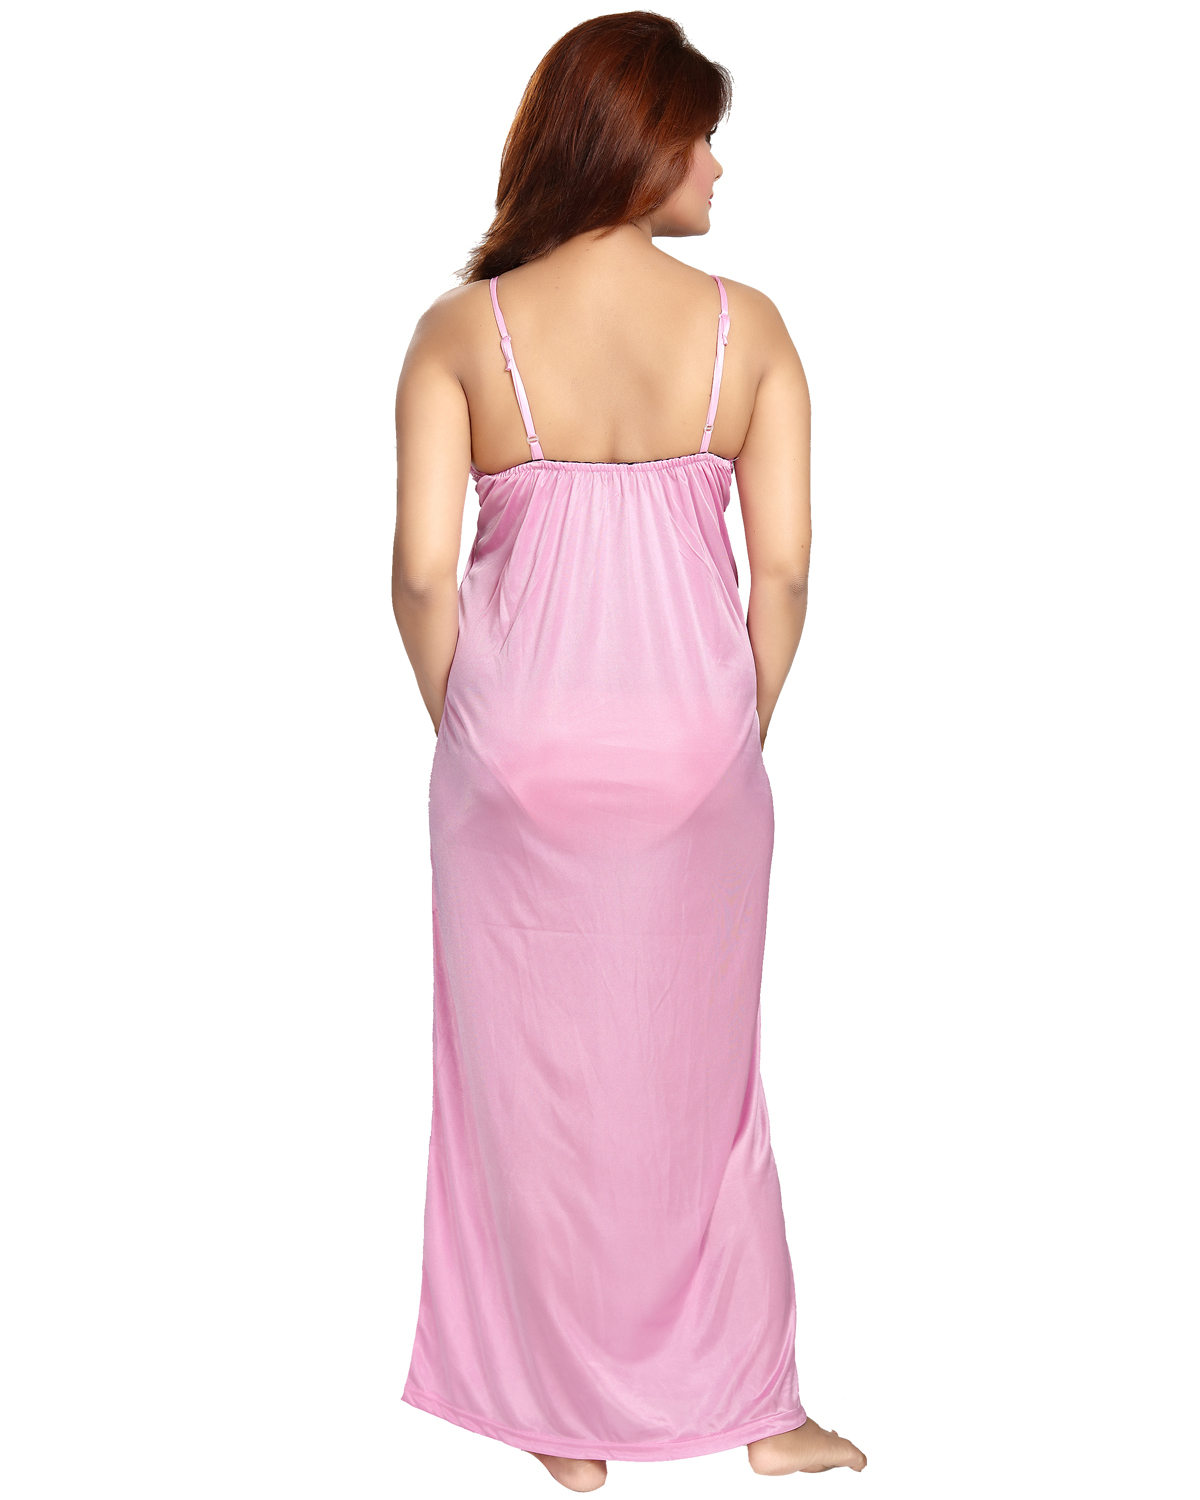 Buy Be You Women Satin Lace Nighty With Robe Pink Free Size Online ₹549 From Shopclues 4060